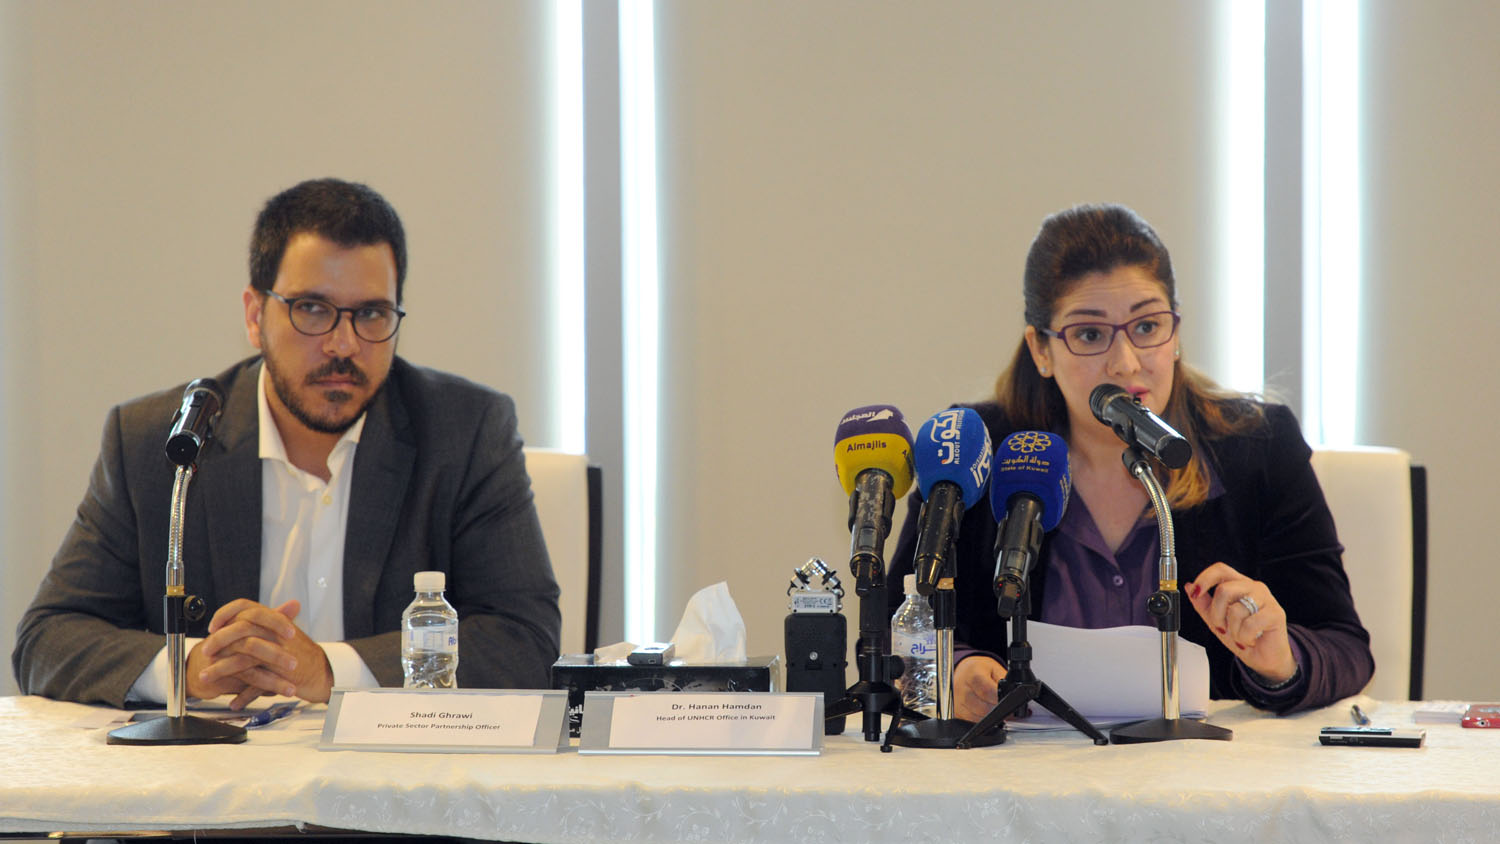 Head of the UNHCR office in Kuwait Dr. Hanan Hamdan during a press conference